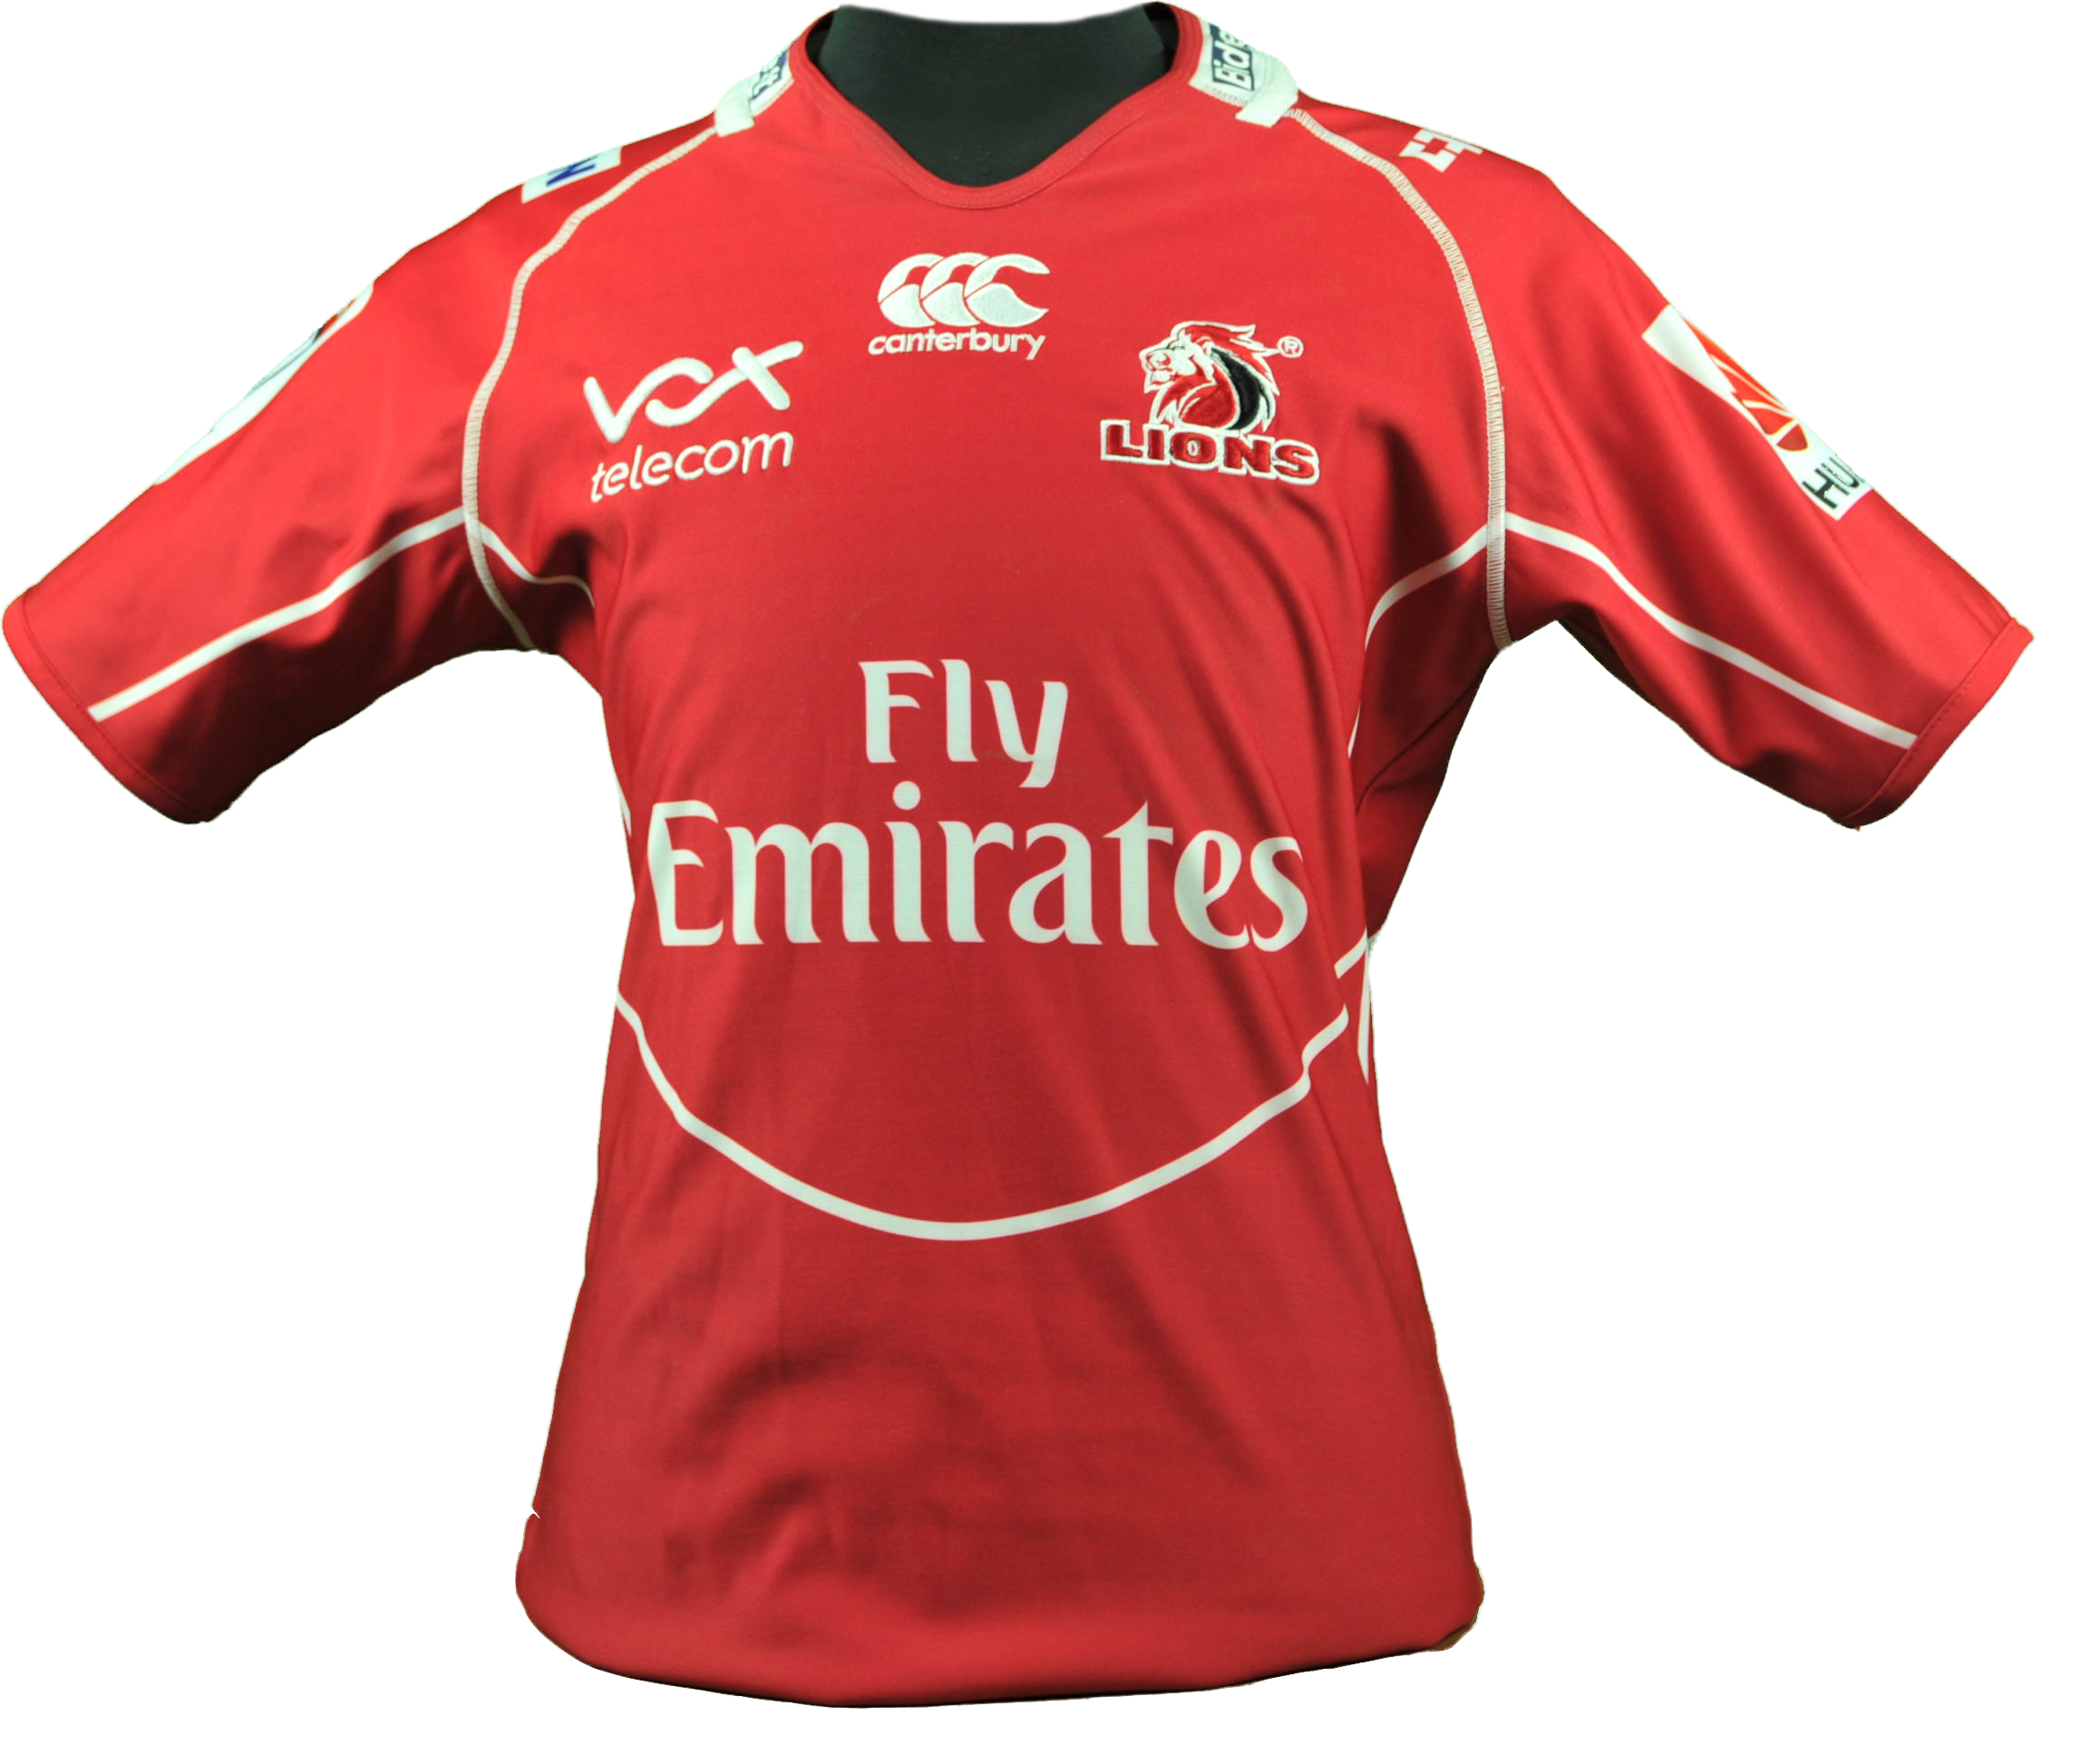 lions 2015 jersey